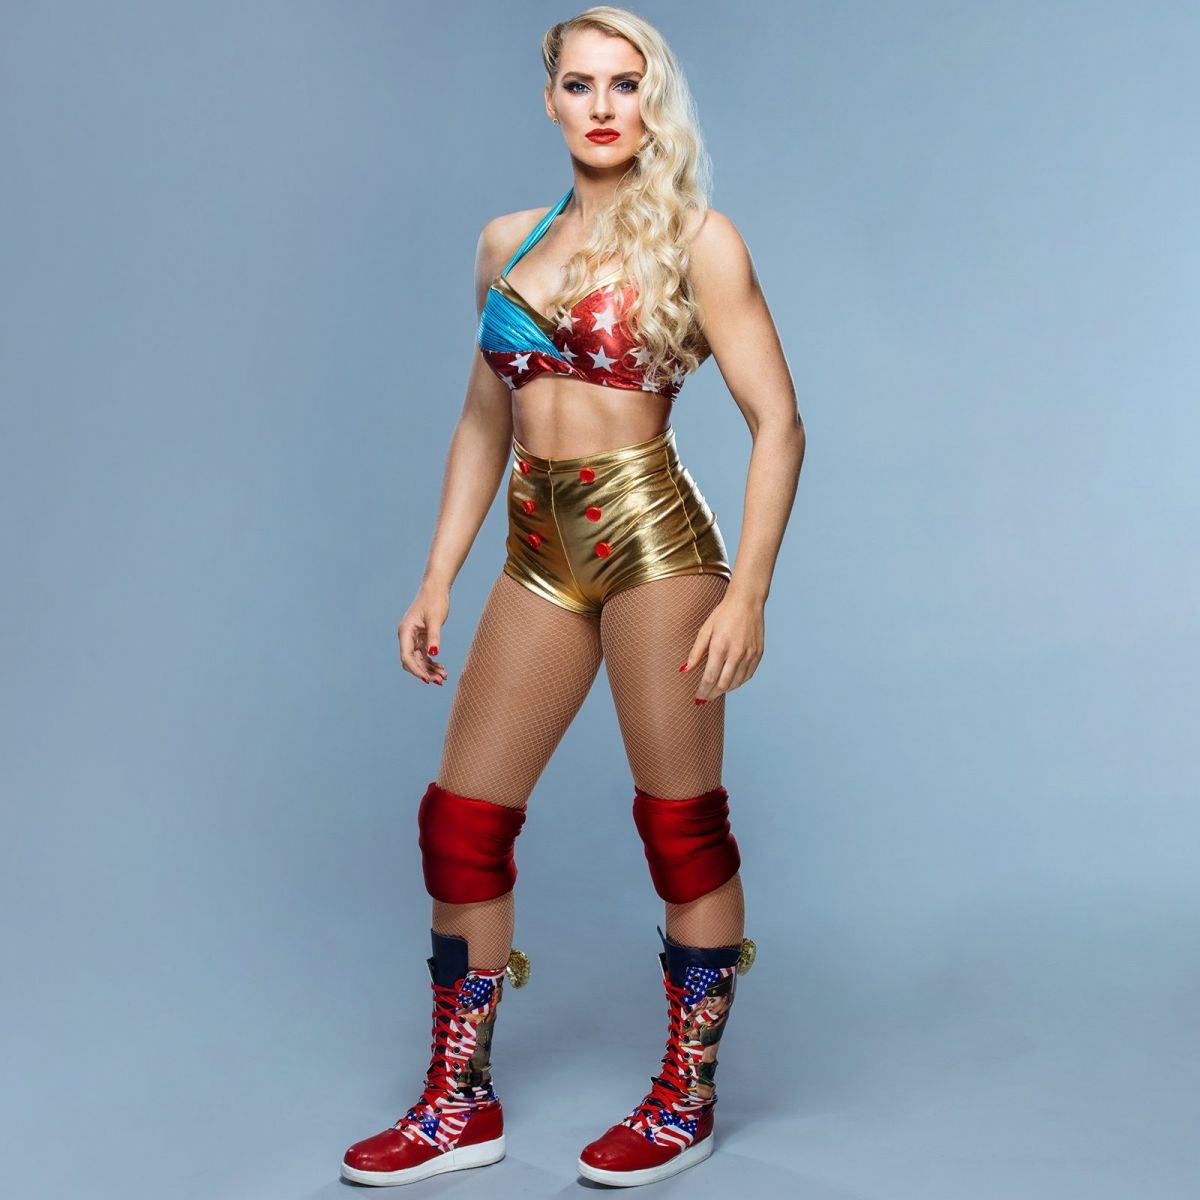 WWE - Lacey Evans Celebrates 4th of July.